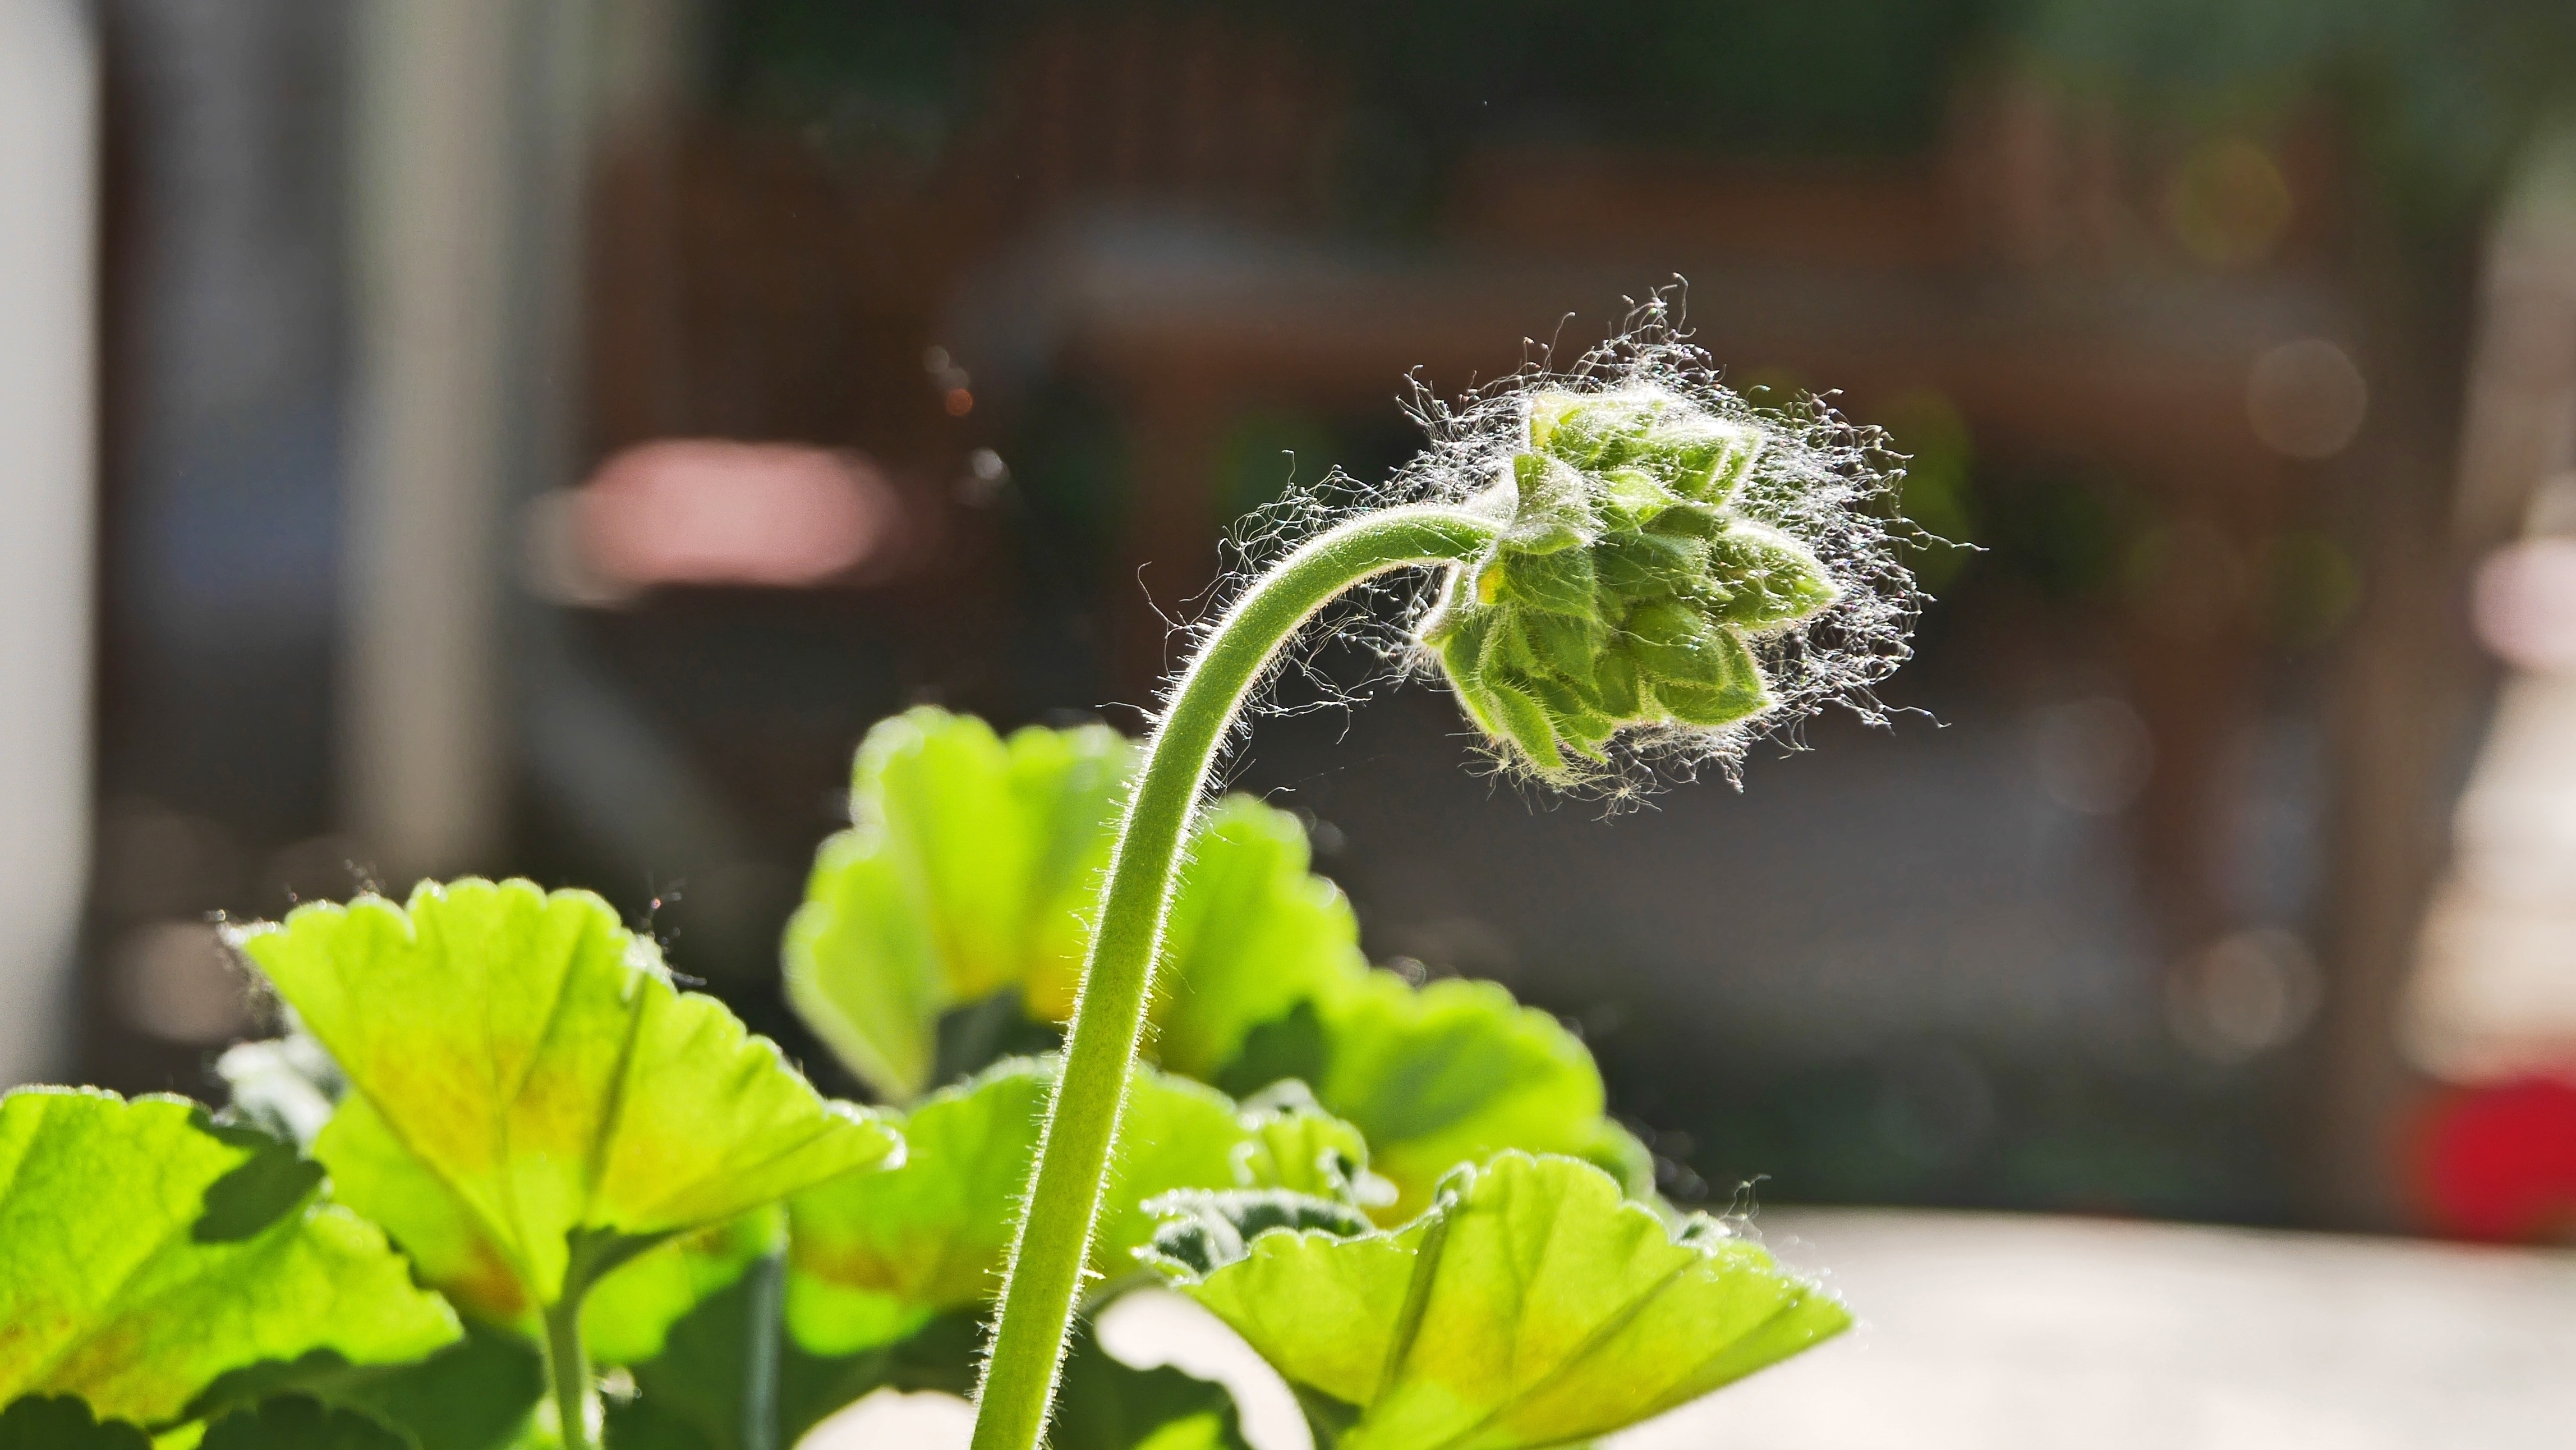 Flower Buds, Geranium, In The Morning, green color, focus on foreground